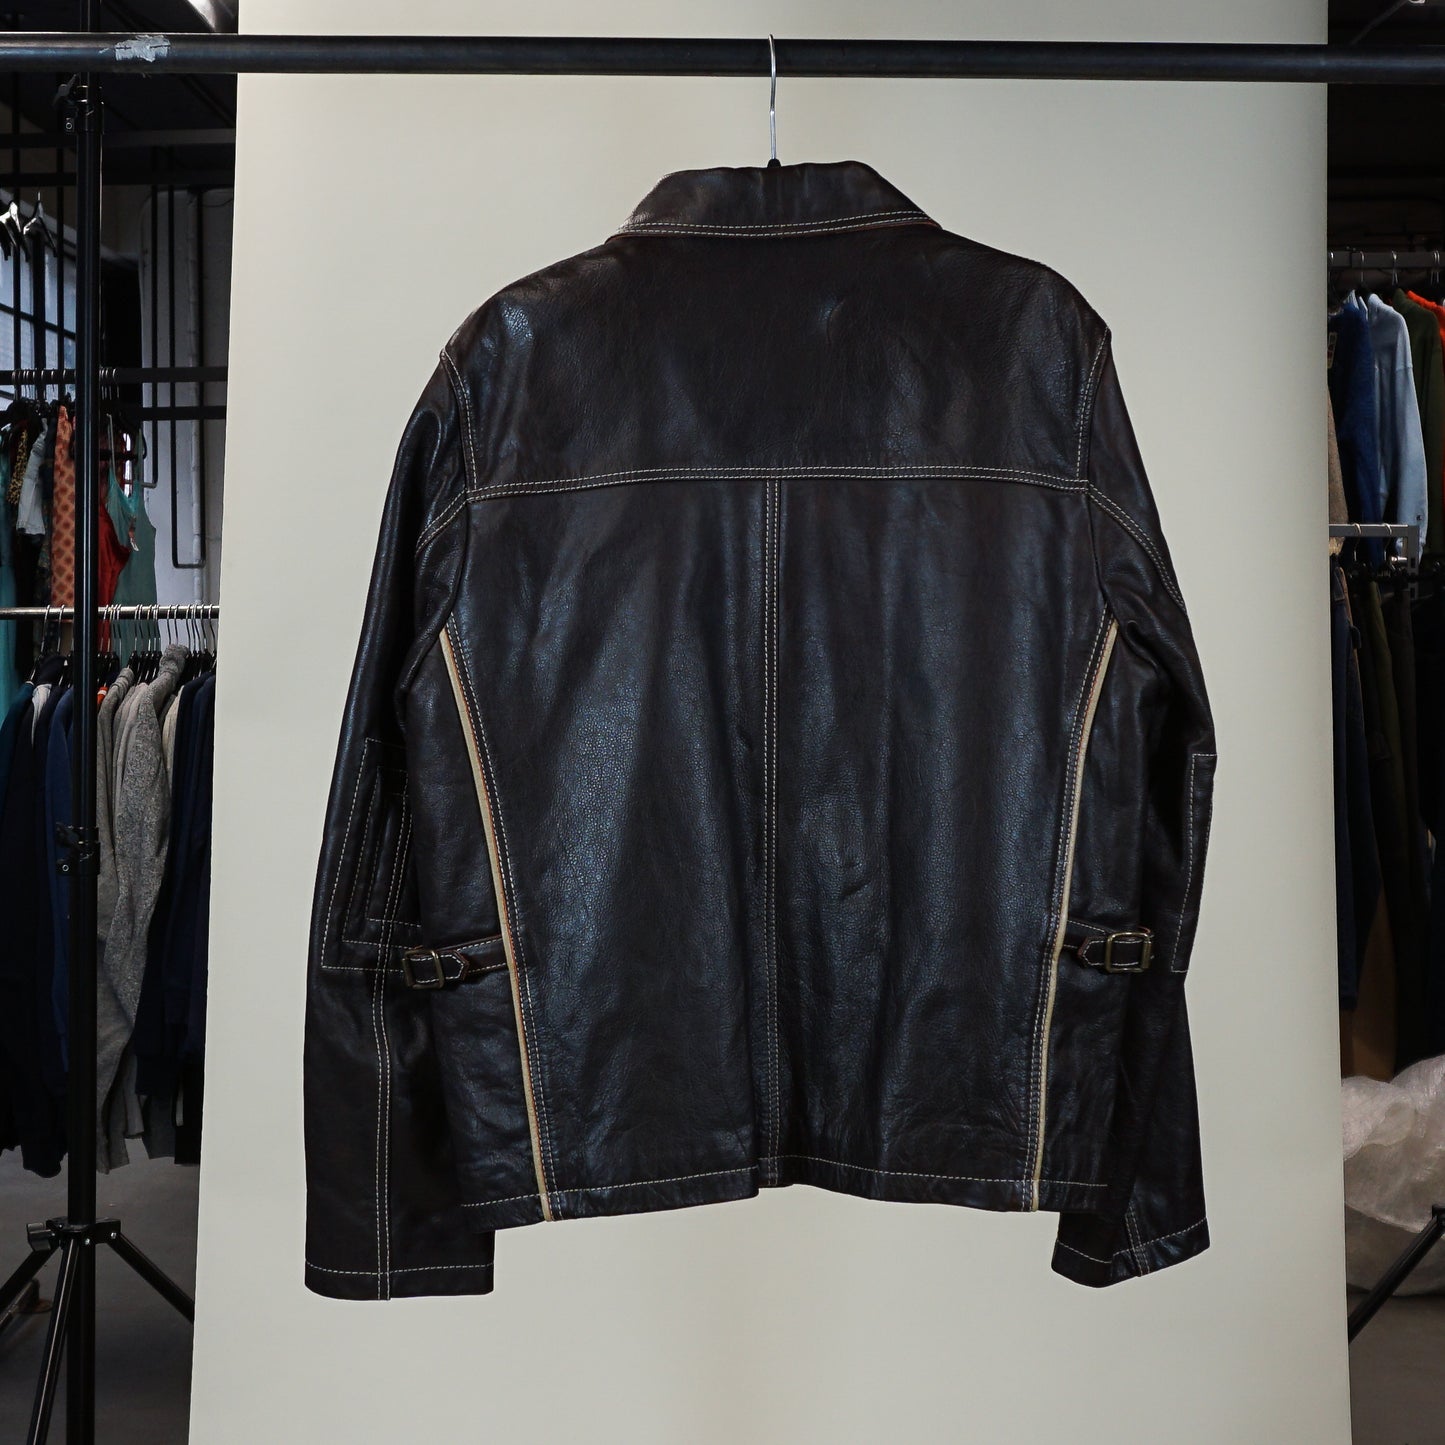 Y2K 'Jays New York' Leather Collared Jacket (M/L)